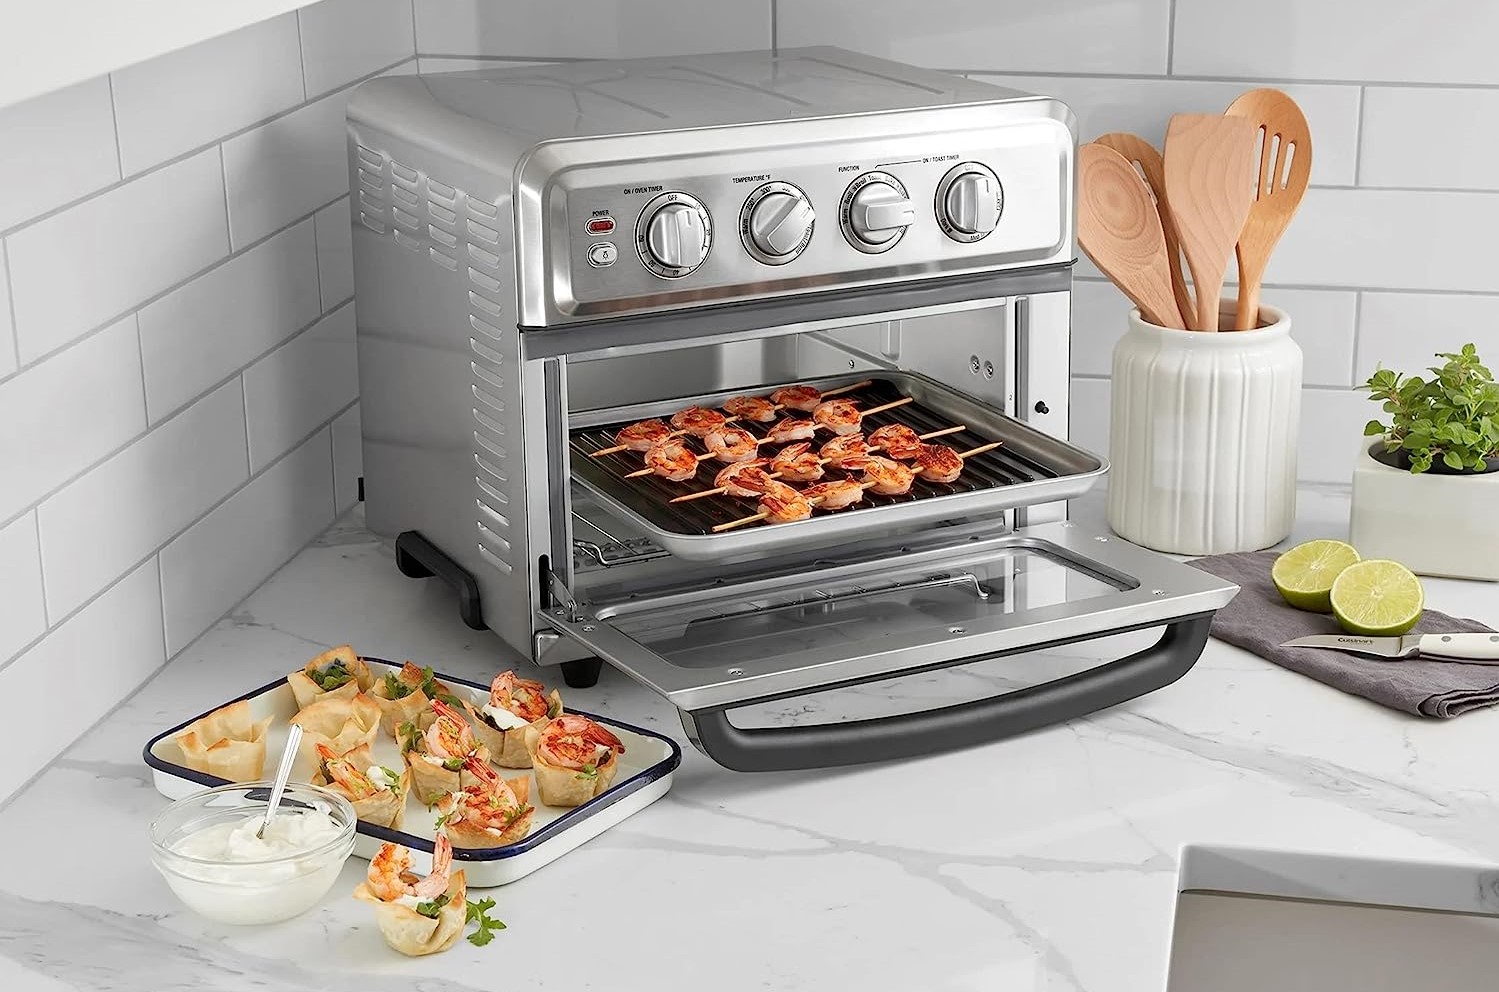 Cuisinart air fryer toaster oven: Get this top-notch machine for less